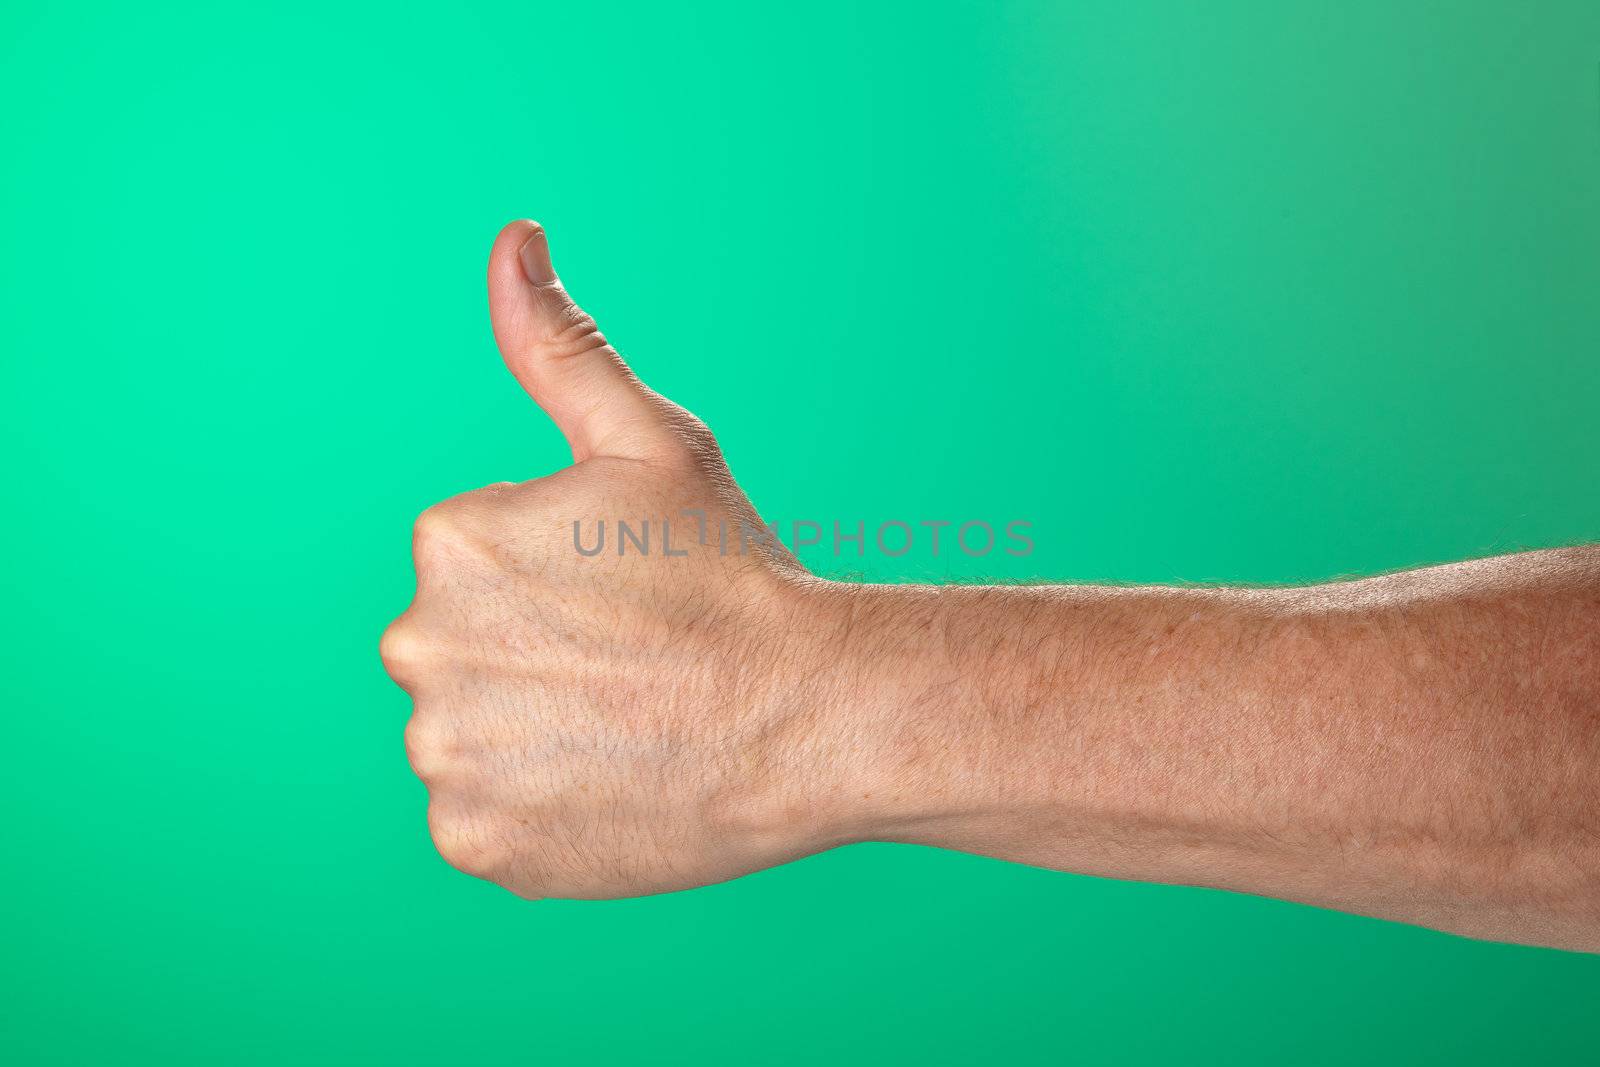 Thumbs Up OK Signal on Green Background